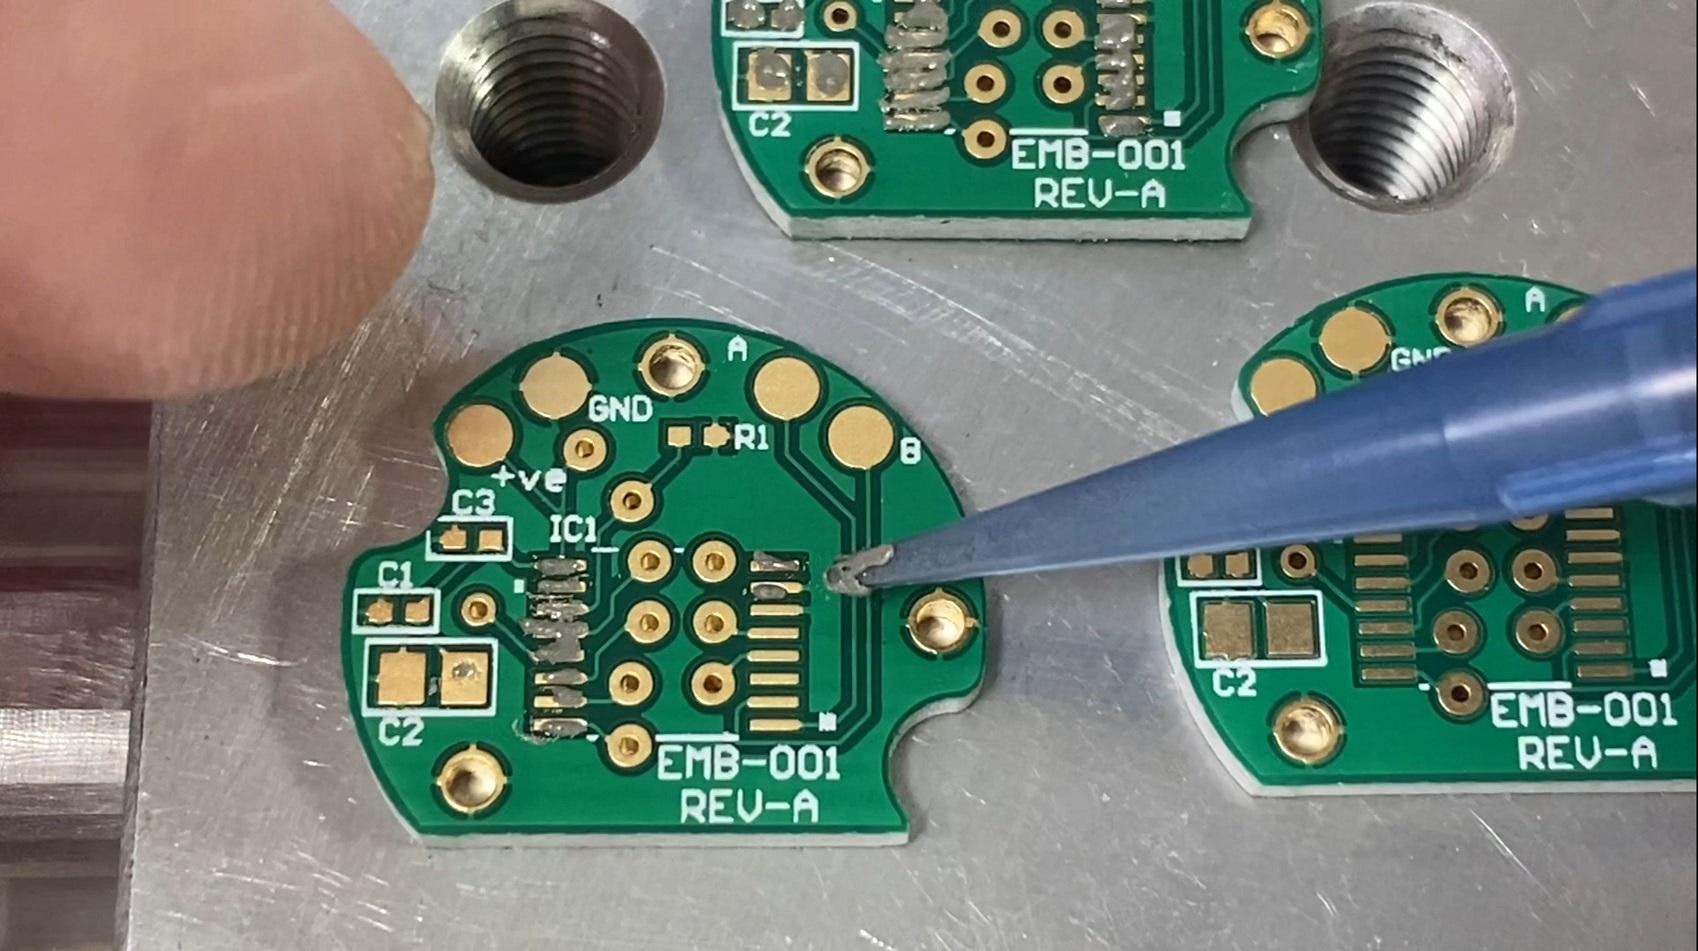 tiny-encoder-boards-being-made-001-lowres.jpg